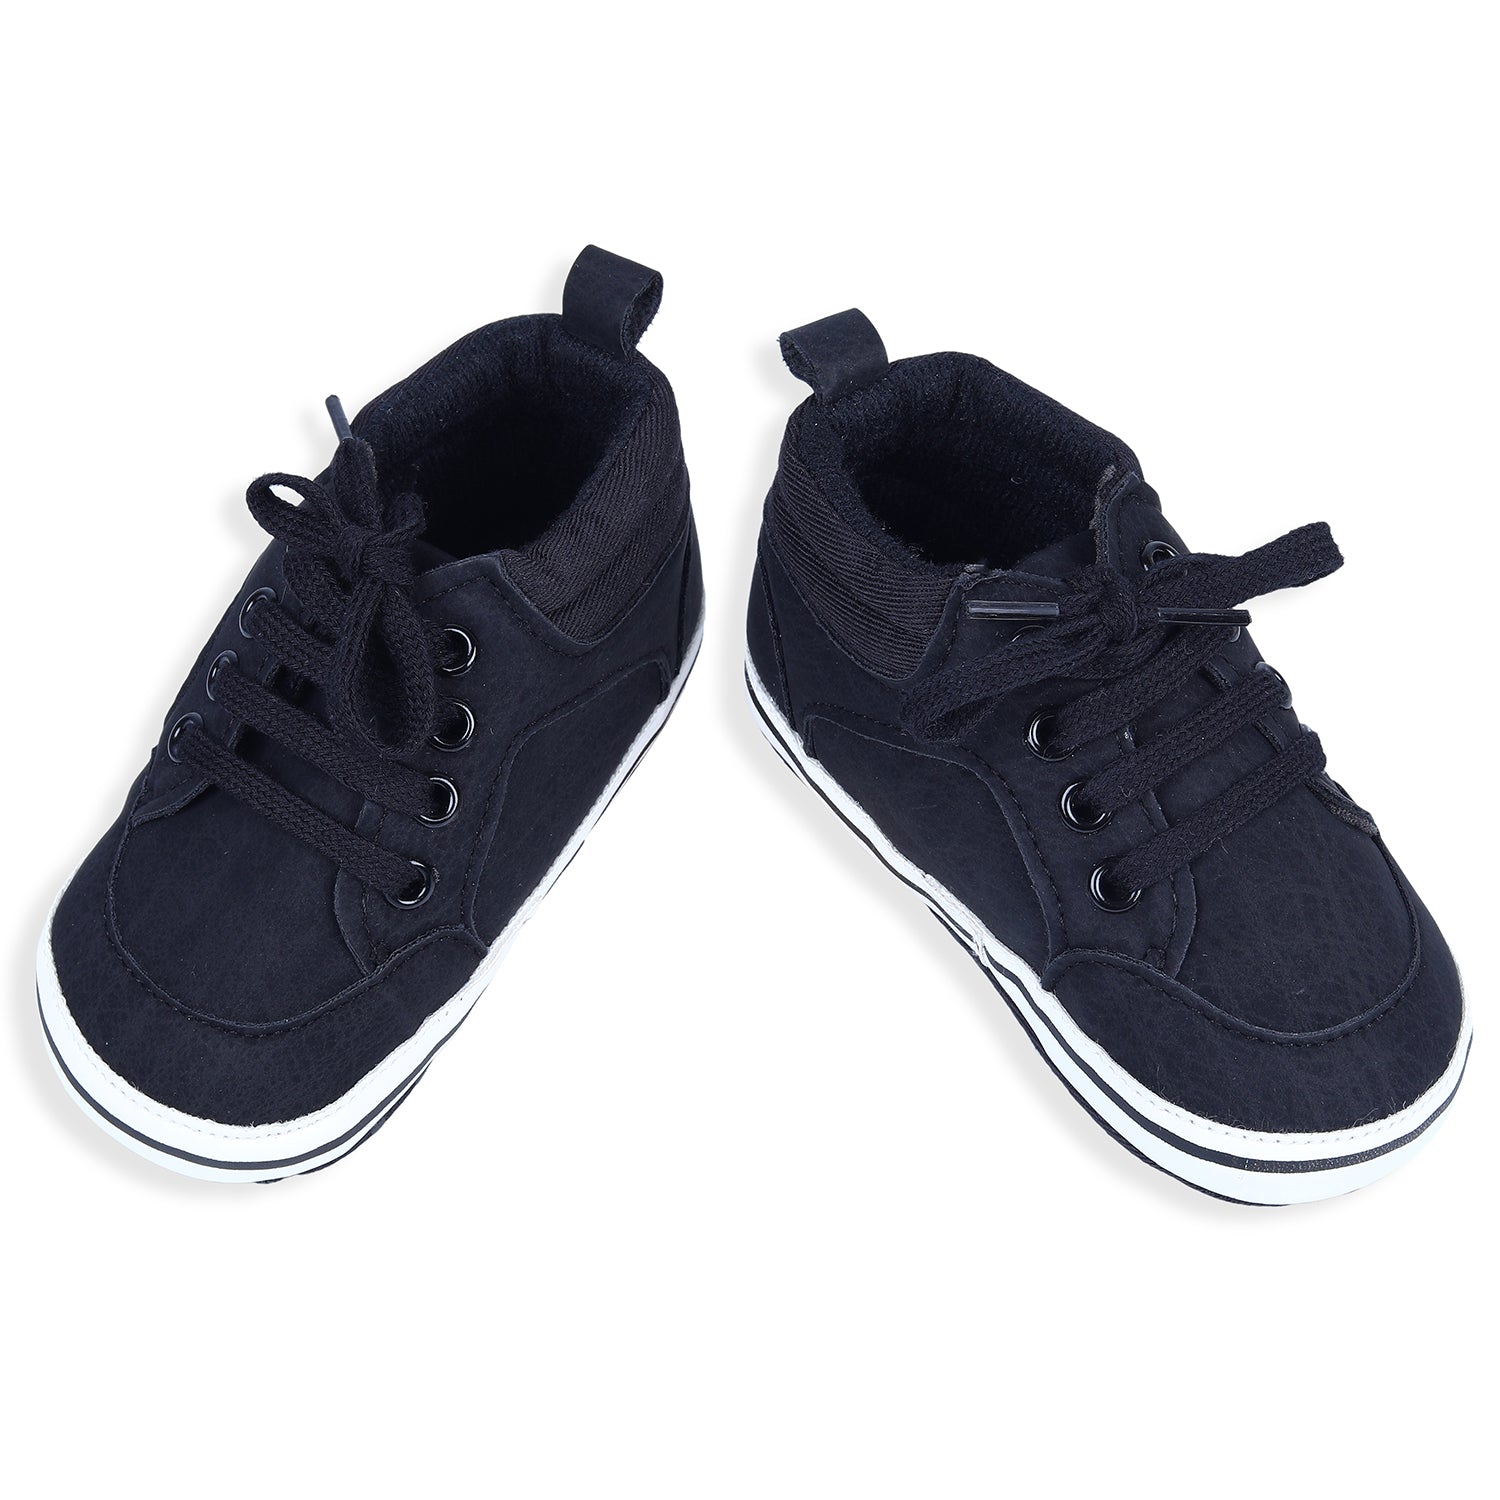 Baby Moo Textured Leather Lace-Up Stylish Infant Anti-Slip Sneaker Shoes - Black